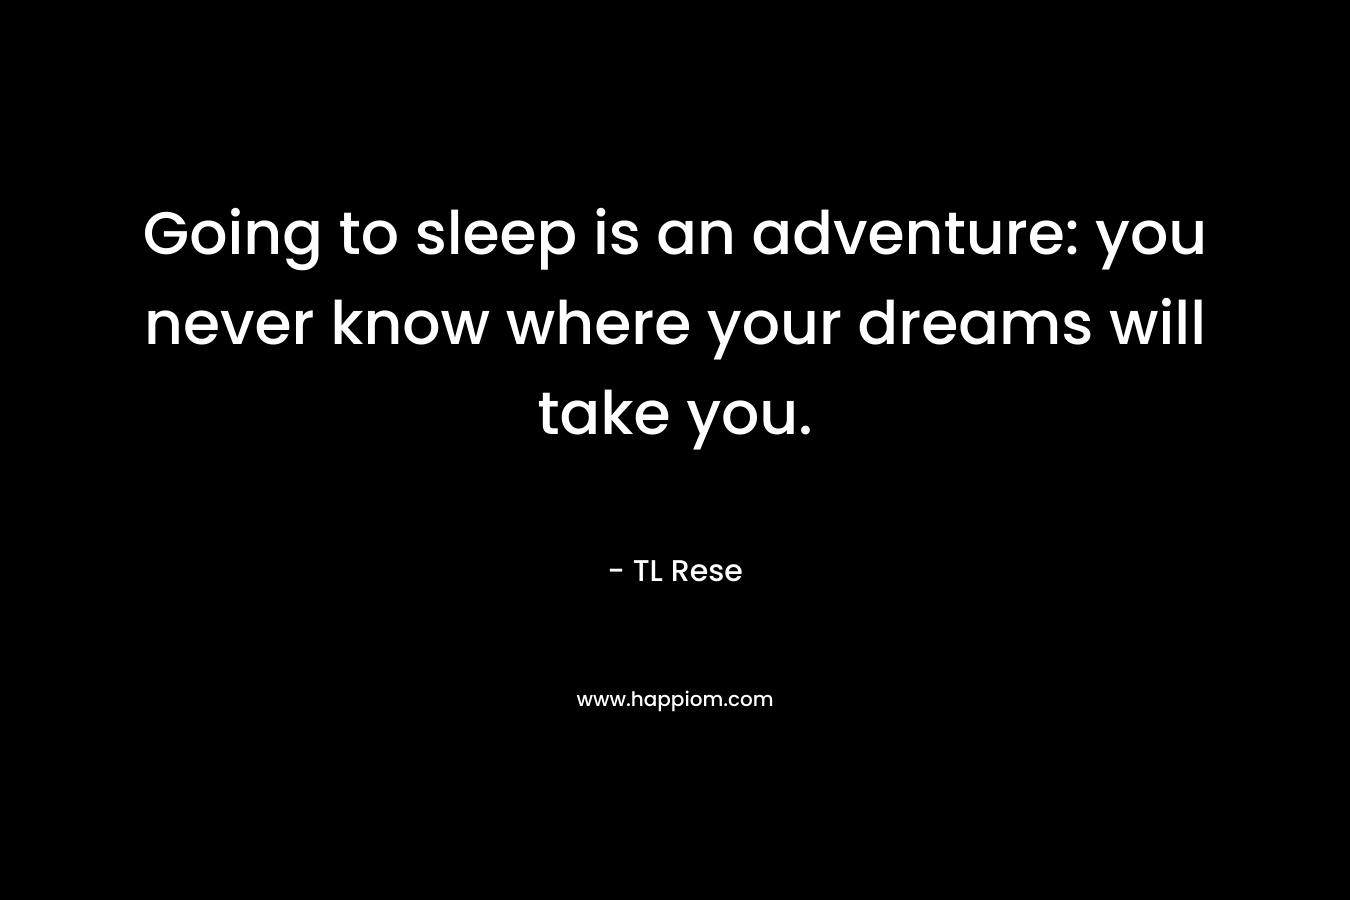 Going to sleep is an adventure: you never know where your dreams will take you. – TL Rese